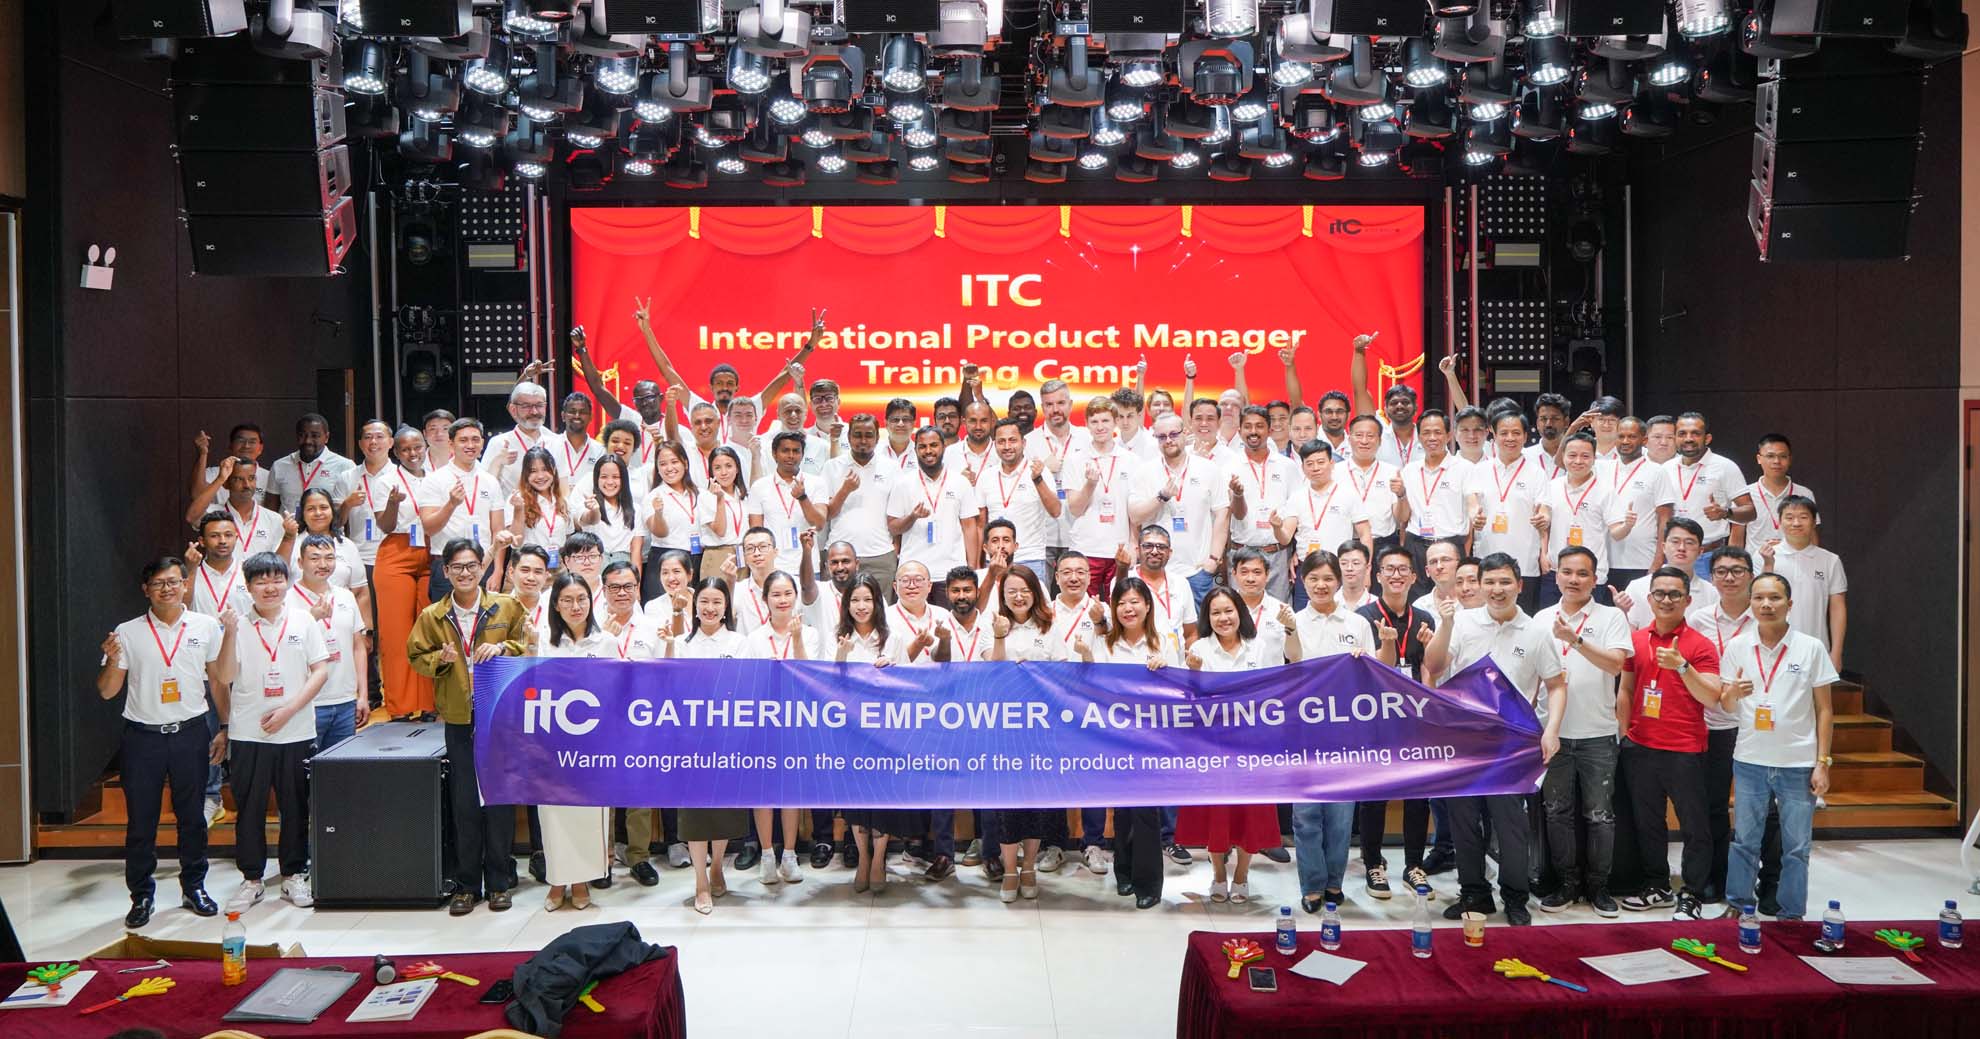 itc 1st International Product Manager Camp Conclude Successfully